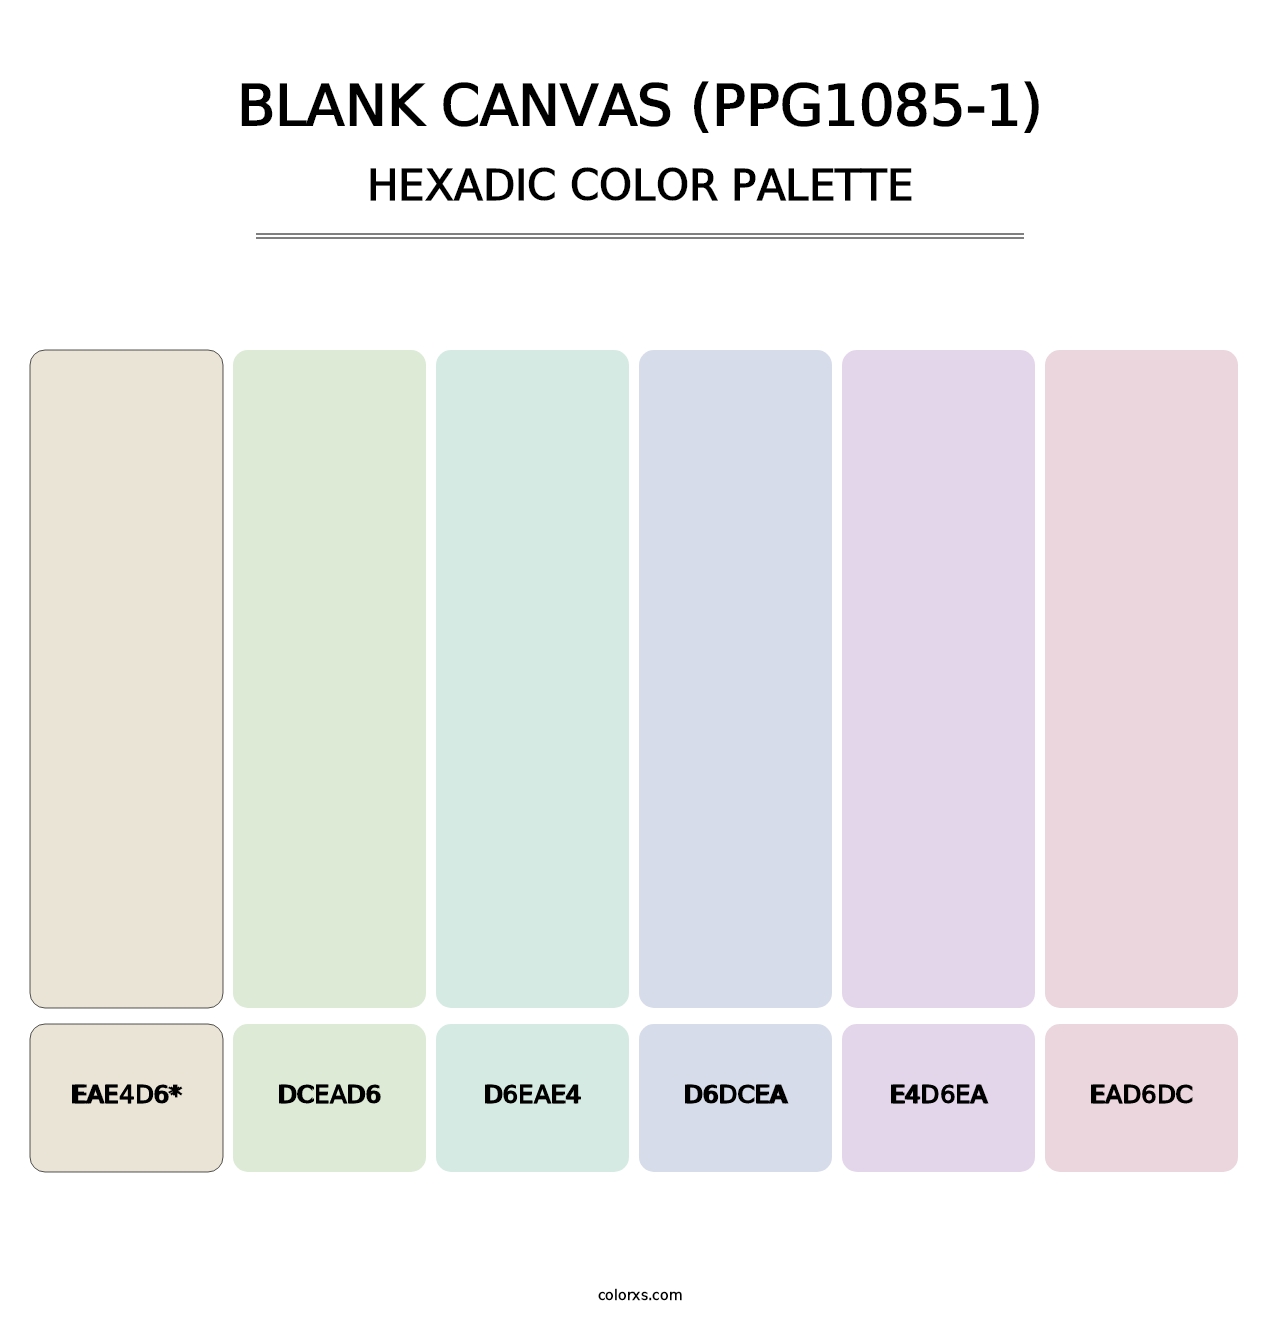 Blank Canvas (PPG1085-1) - Hexadic Color Palette